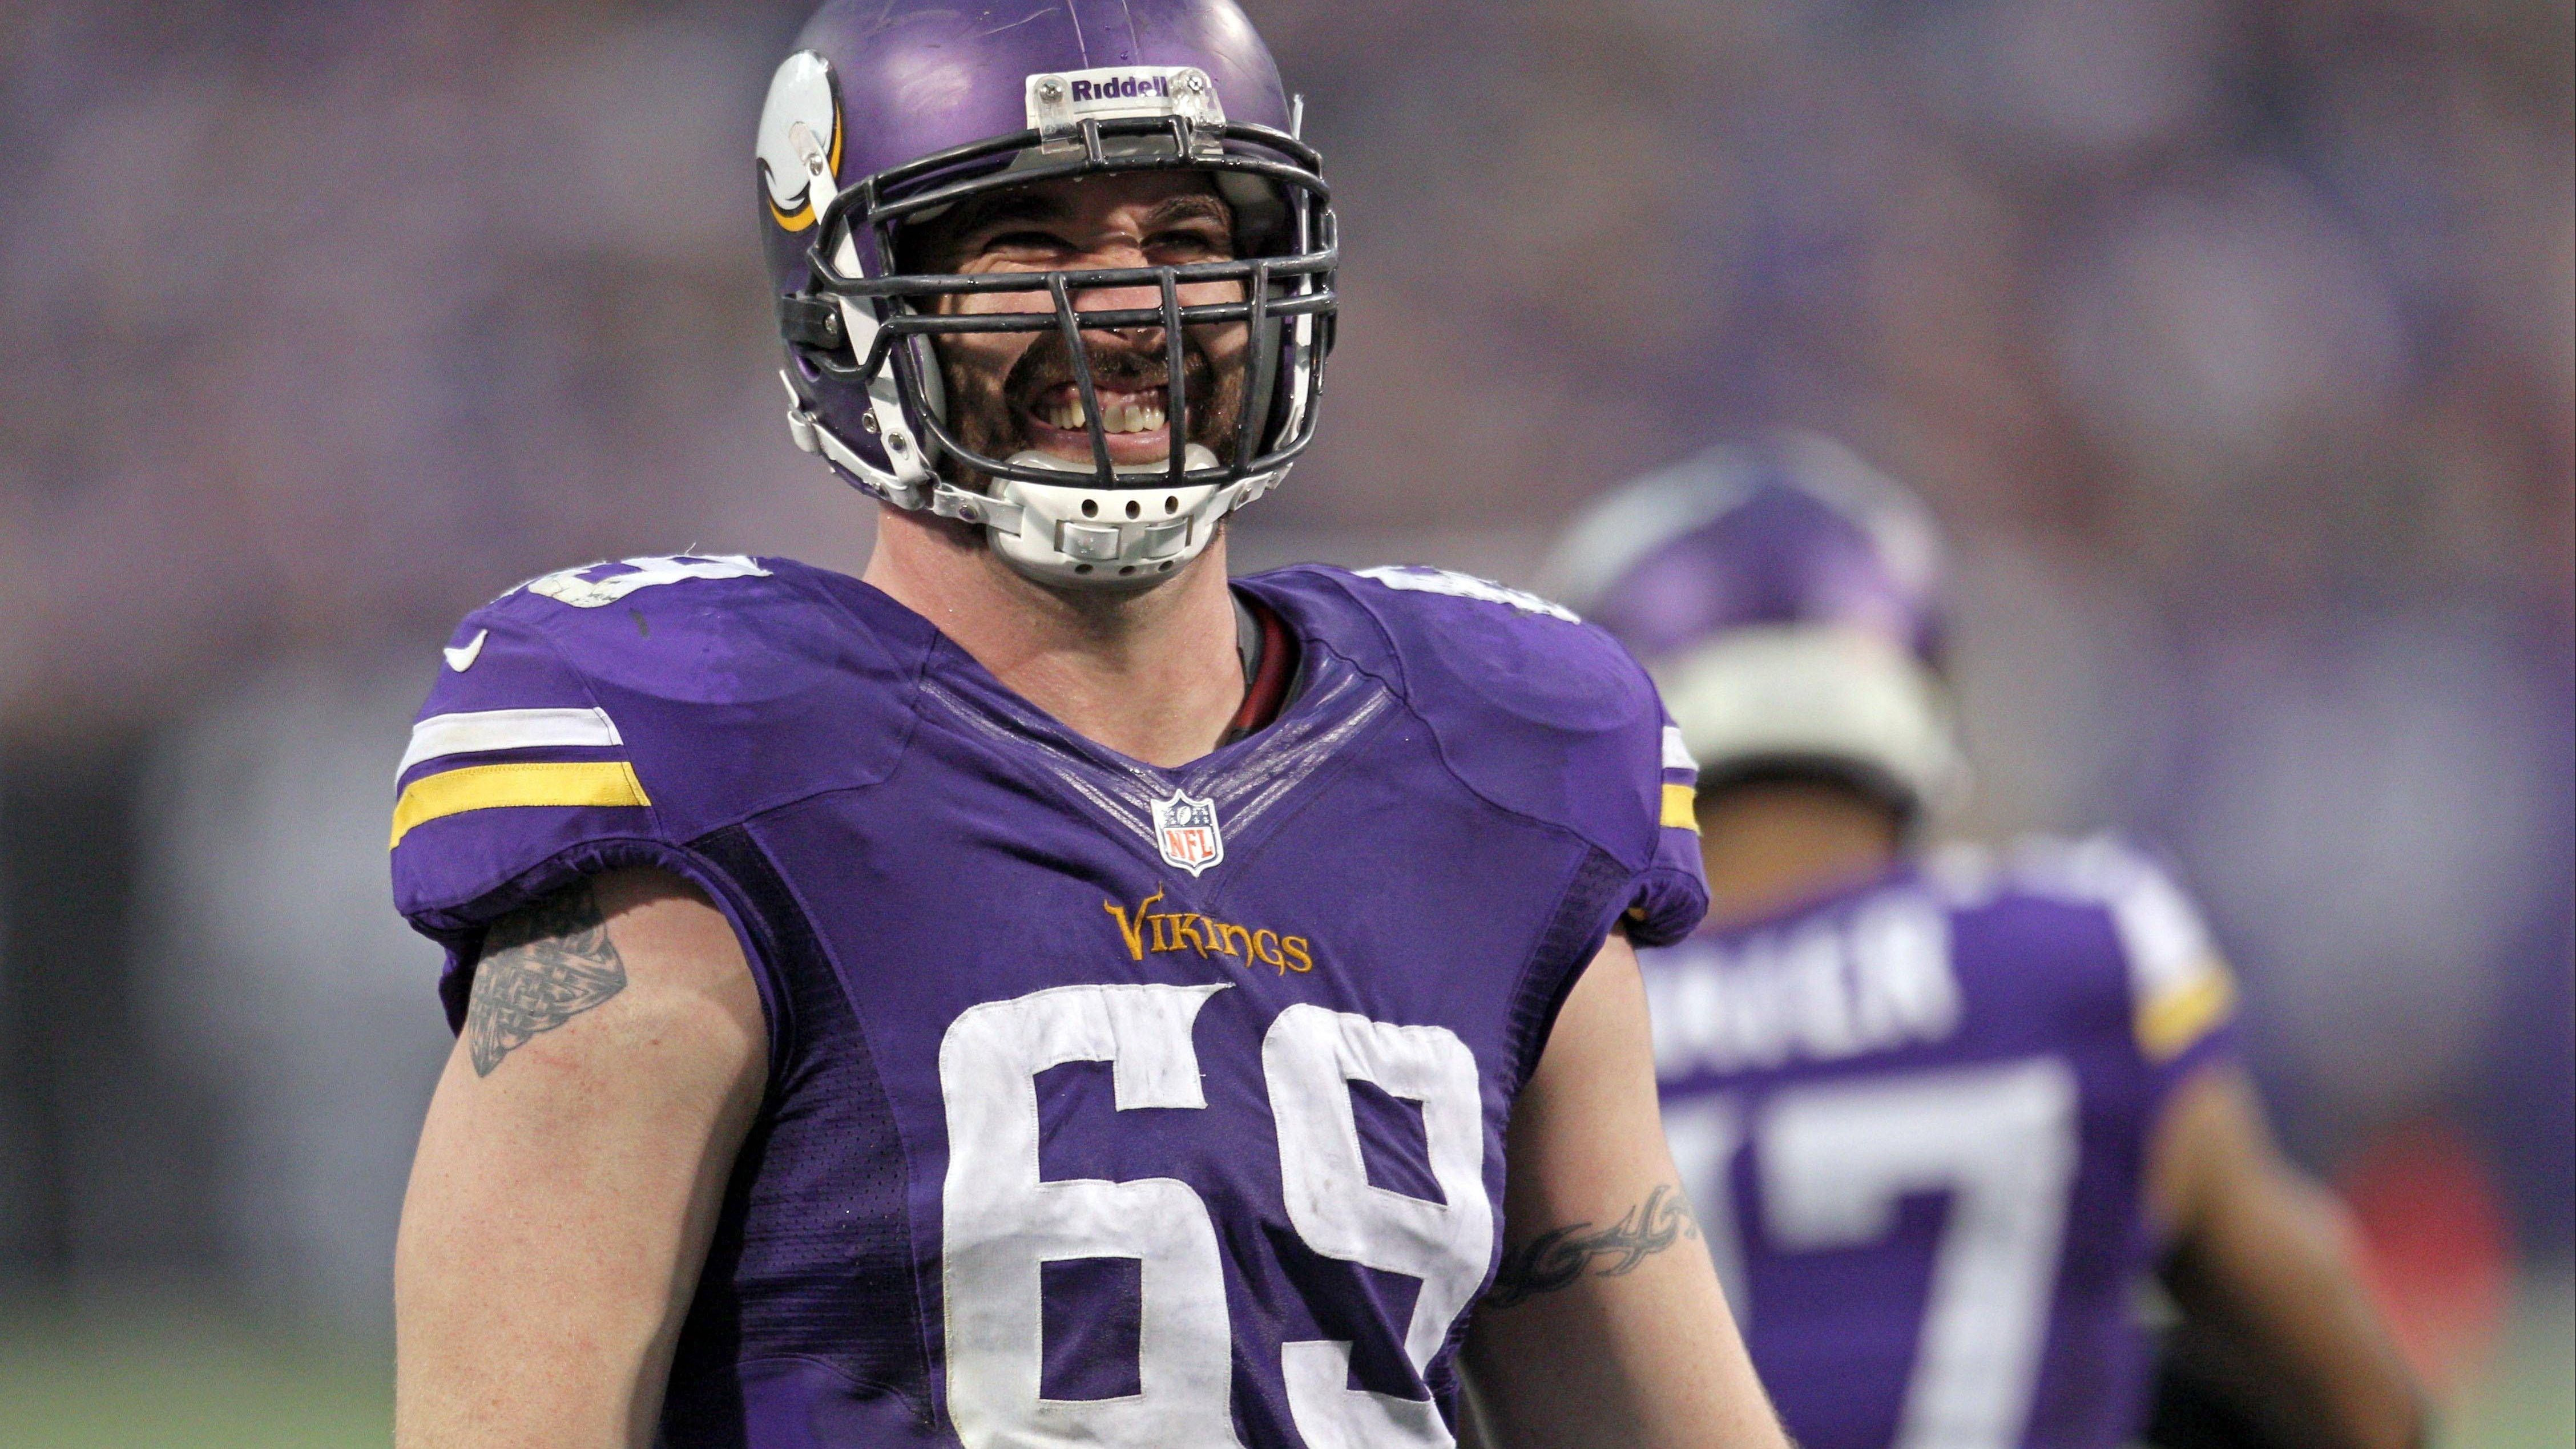 <strong>69: Jared Allen</strong><br>Teams: Kansas City Chiefs, Minnesota Vikings, Chicago Bears, Carolina Panthers<br>Position: Defensive End<br>Erfolge: viermaliger First Team All-Pro, fünfmaliger Pro Bowler<br>Honorable Mention: Jon Runyan